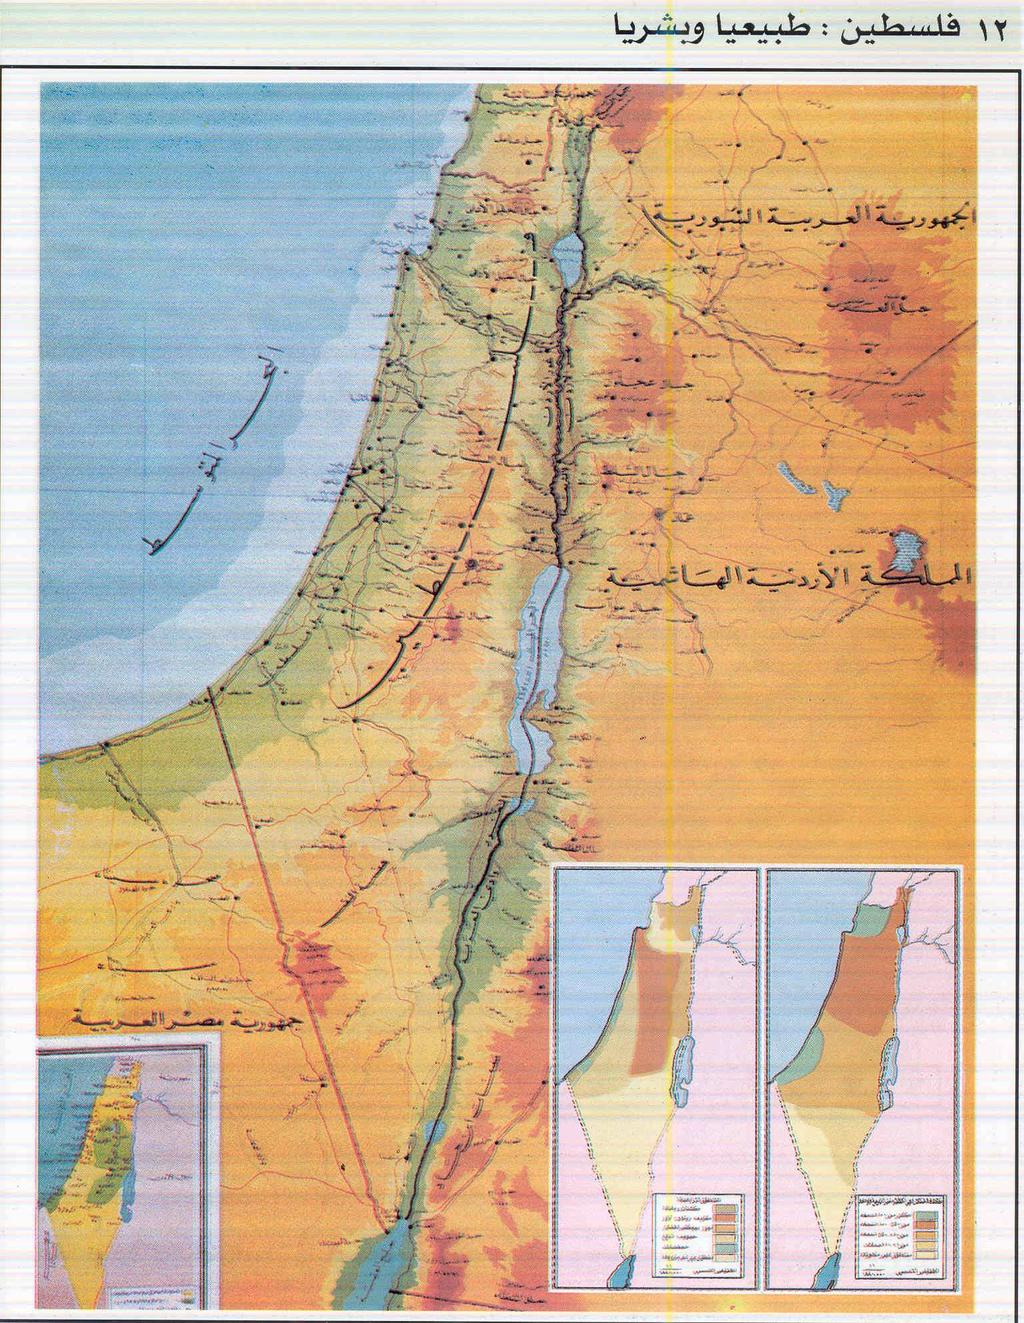 Palestine: Physical and Human [Geography] Palestine Atlas of Palestine, the Arab Homeland and the World (2003/4) p.